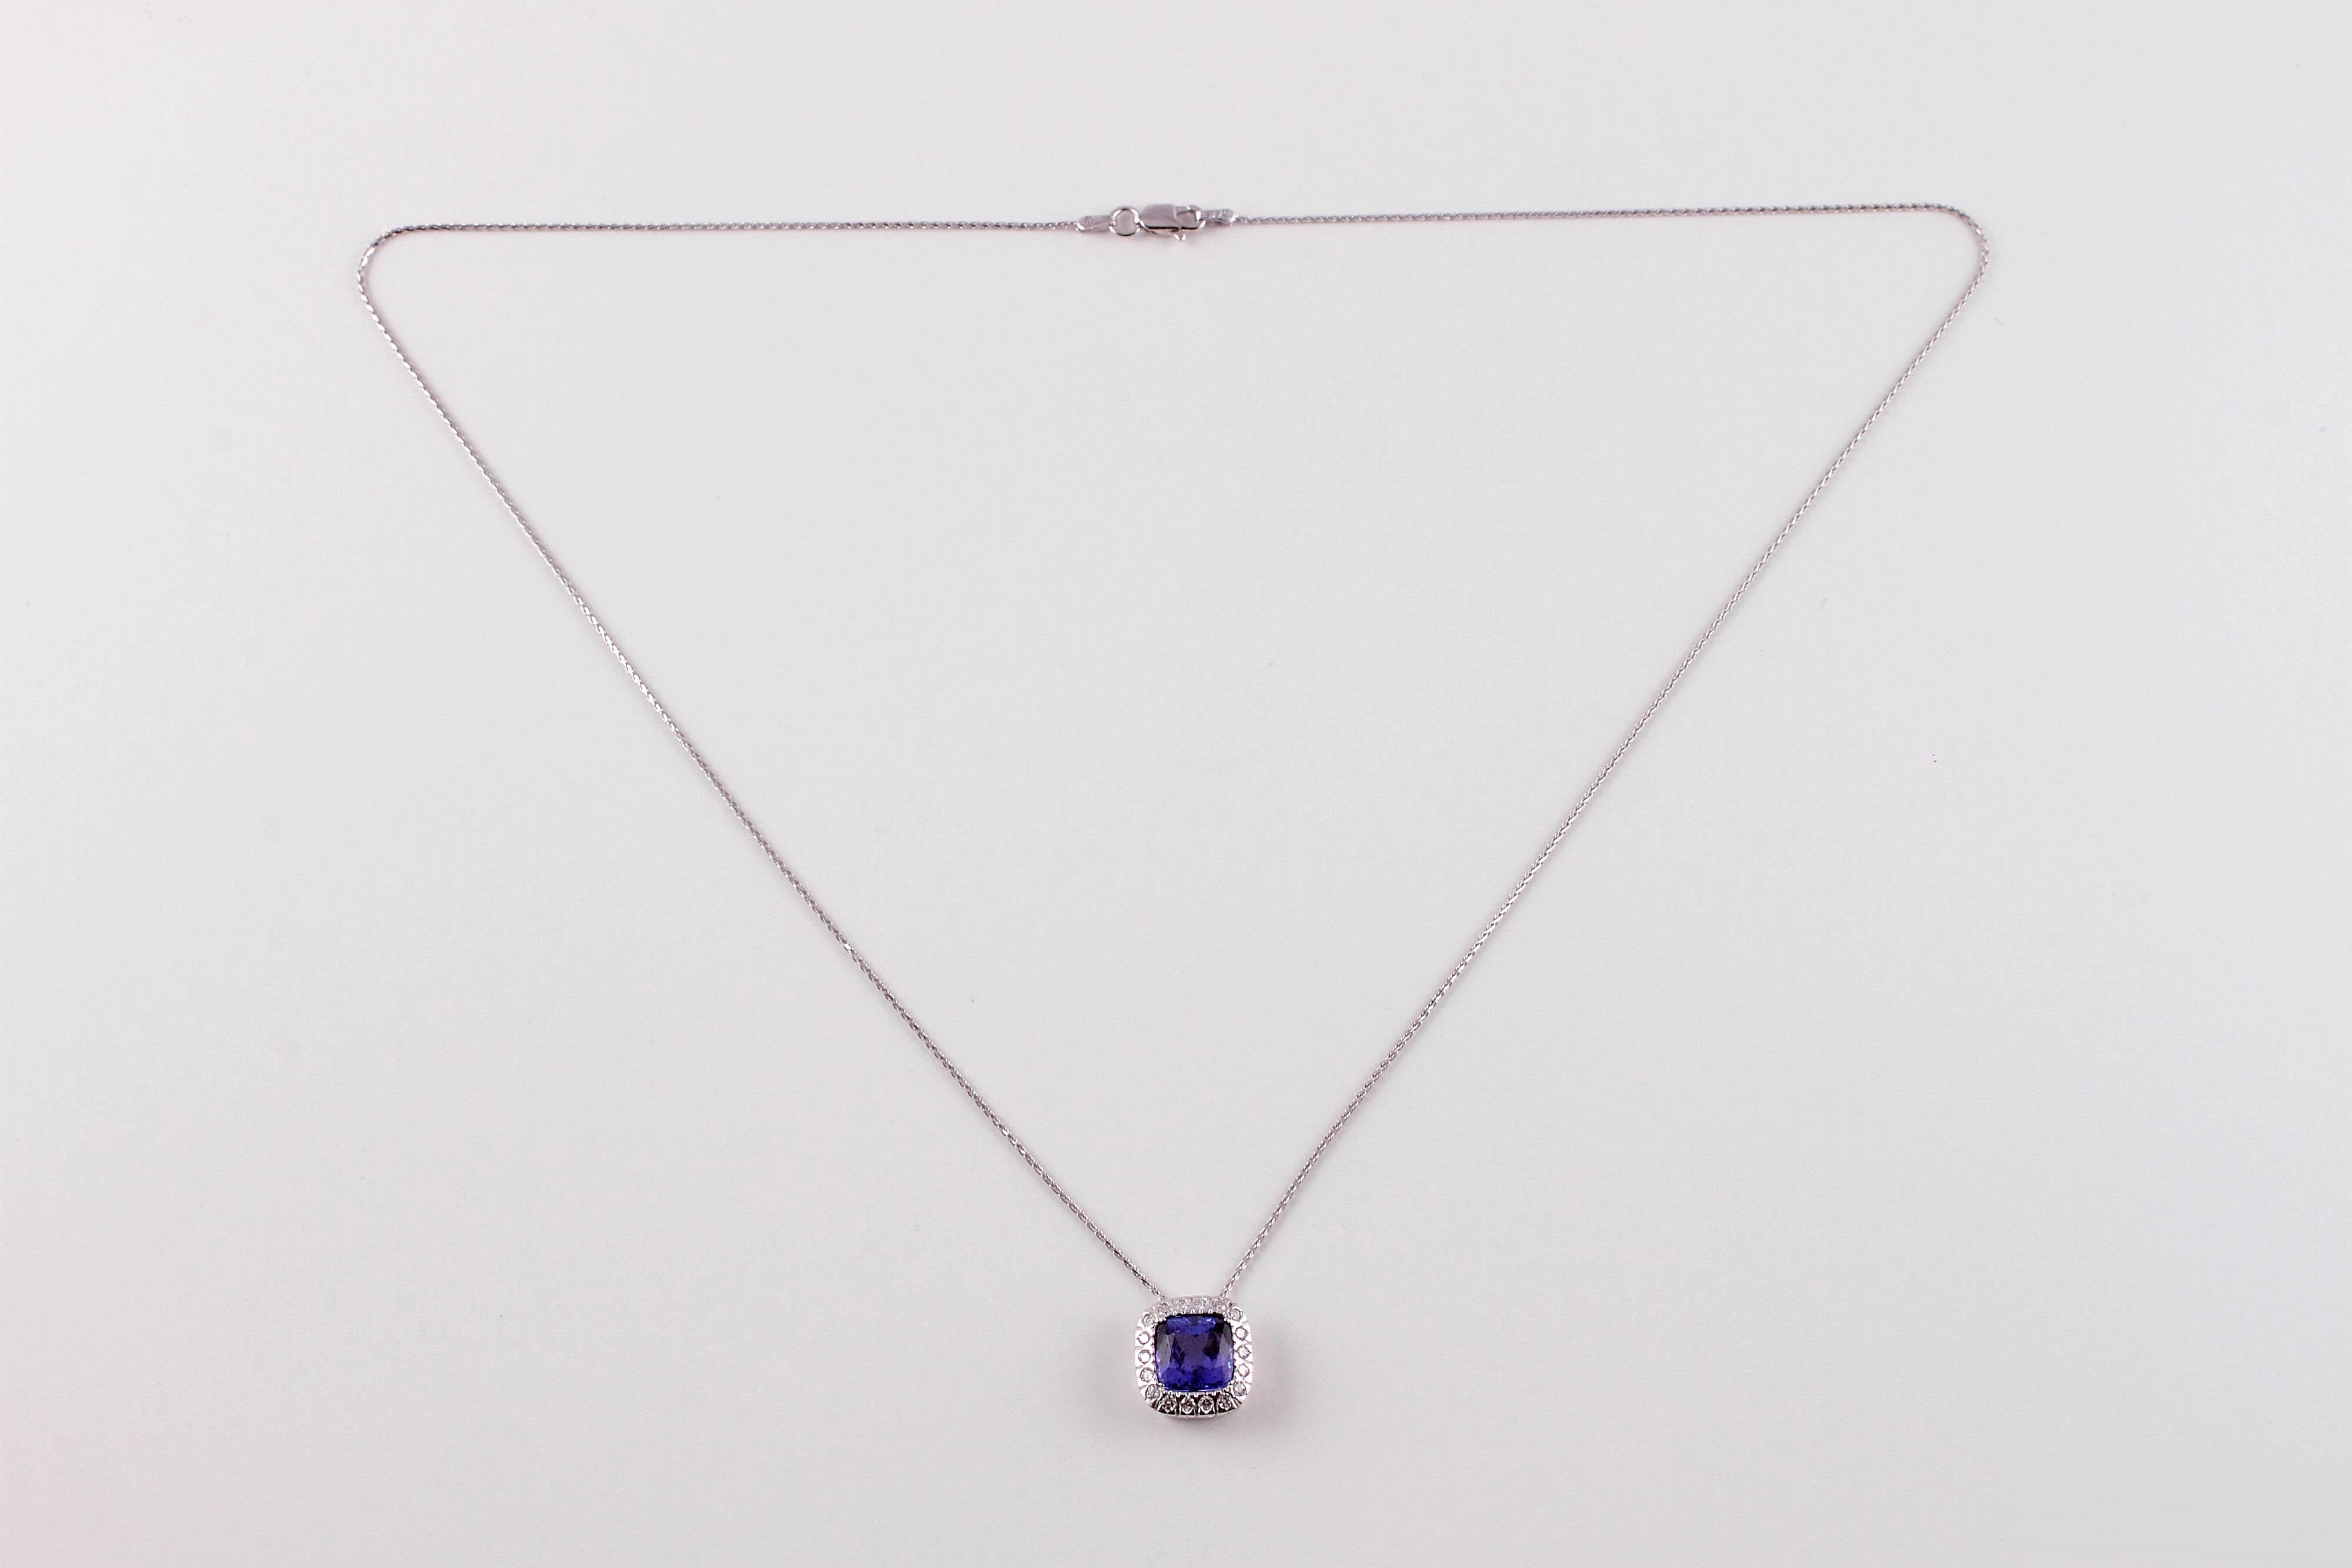 This lovely 3.15 carat tanzanite is surrounded by 0.28 carats of diamonds and is suspended from a 20 inch, white gold chain with a lobster clasp.